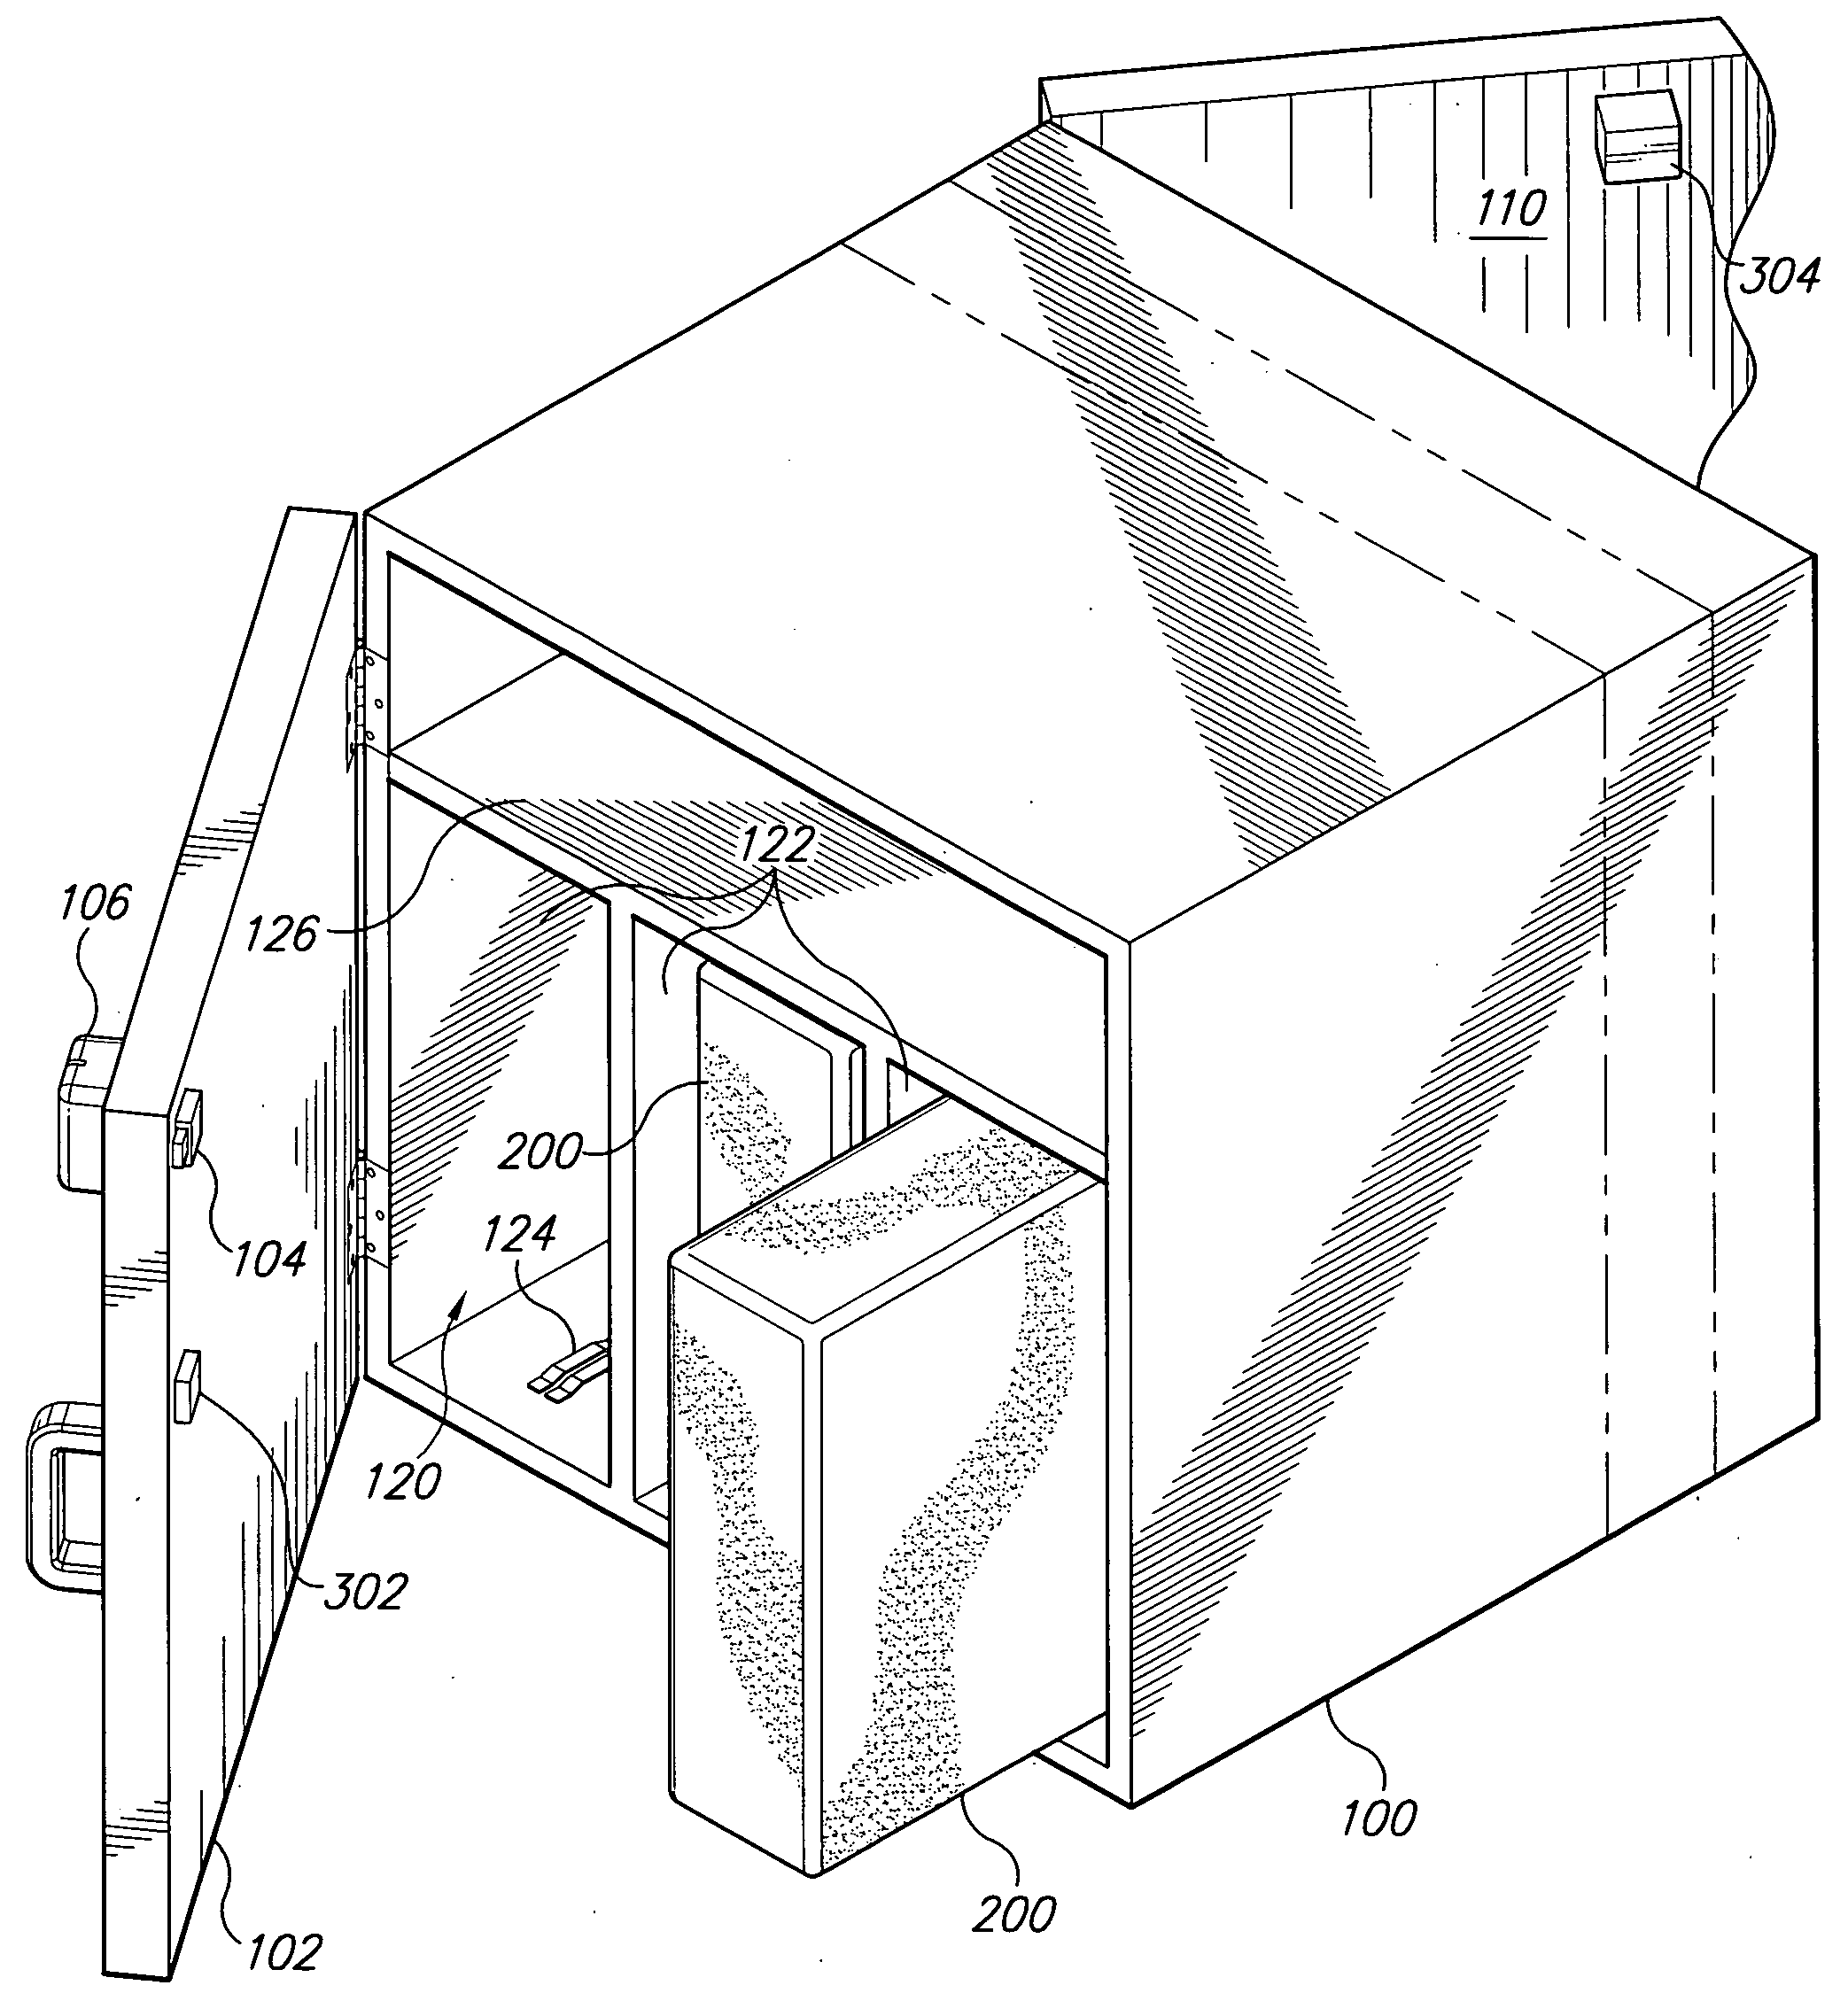 System and method for delivery of goods ordered via the internet